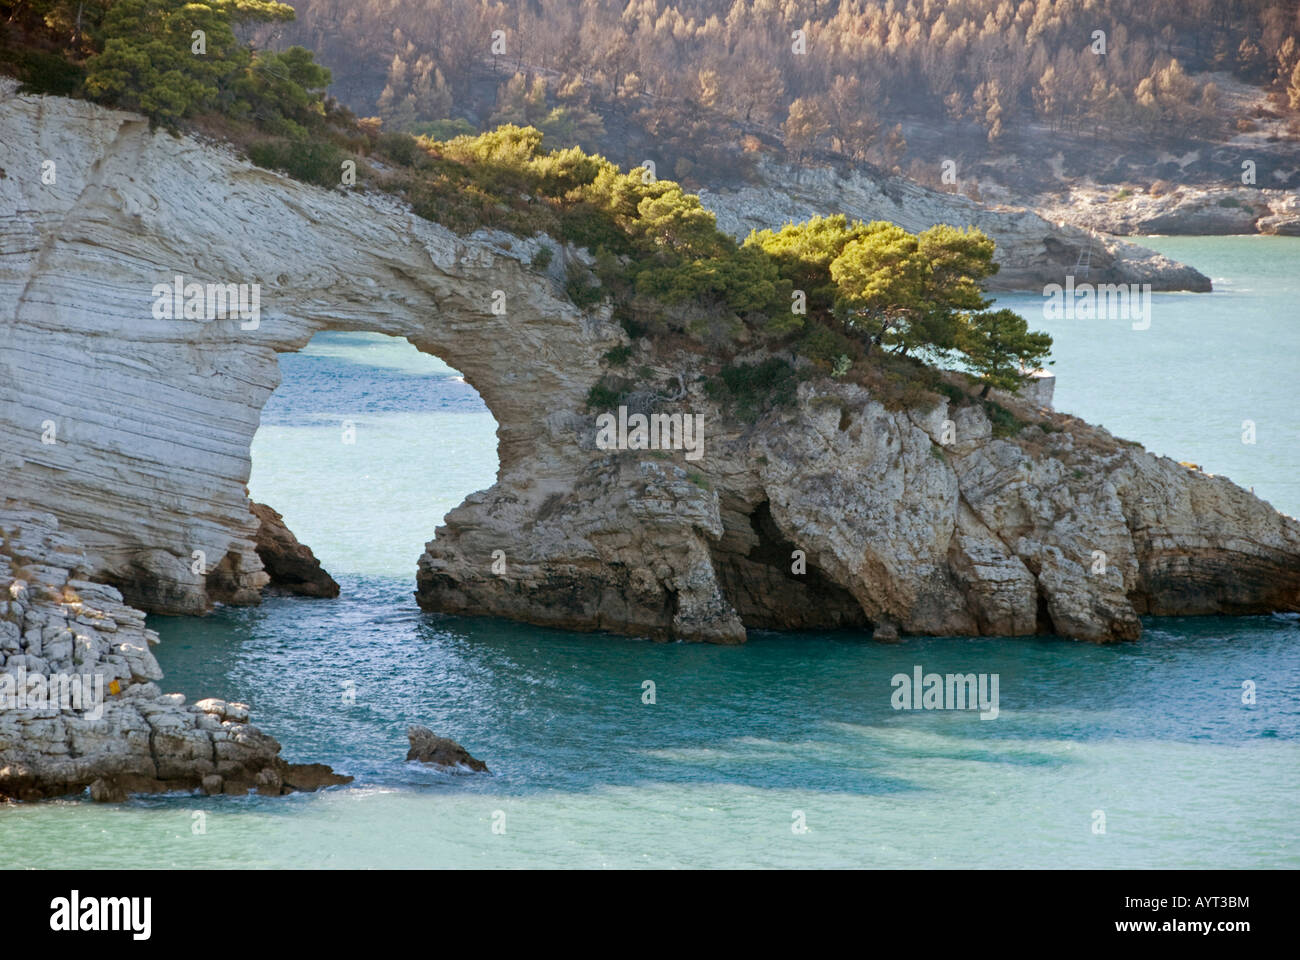 Rock window, coastal cliffs at the very tip of the heel of the Italian "boot, " Vieste, Apulia, Southern Italy Stock Photo